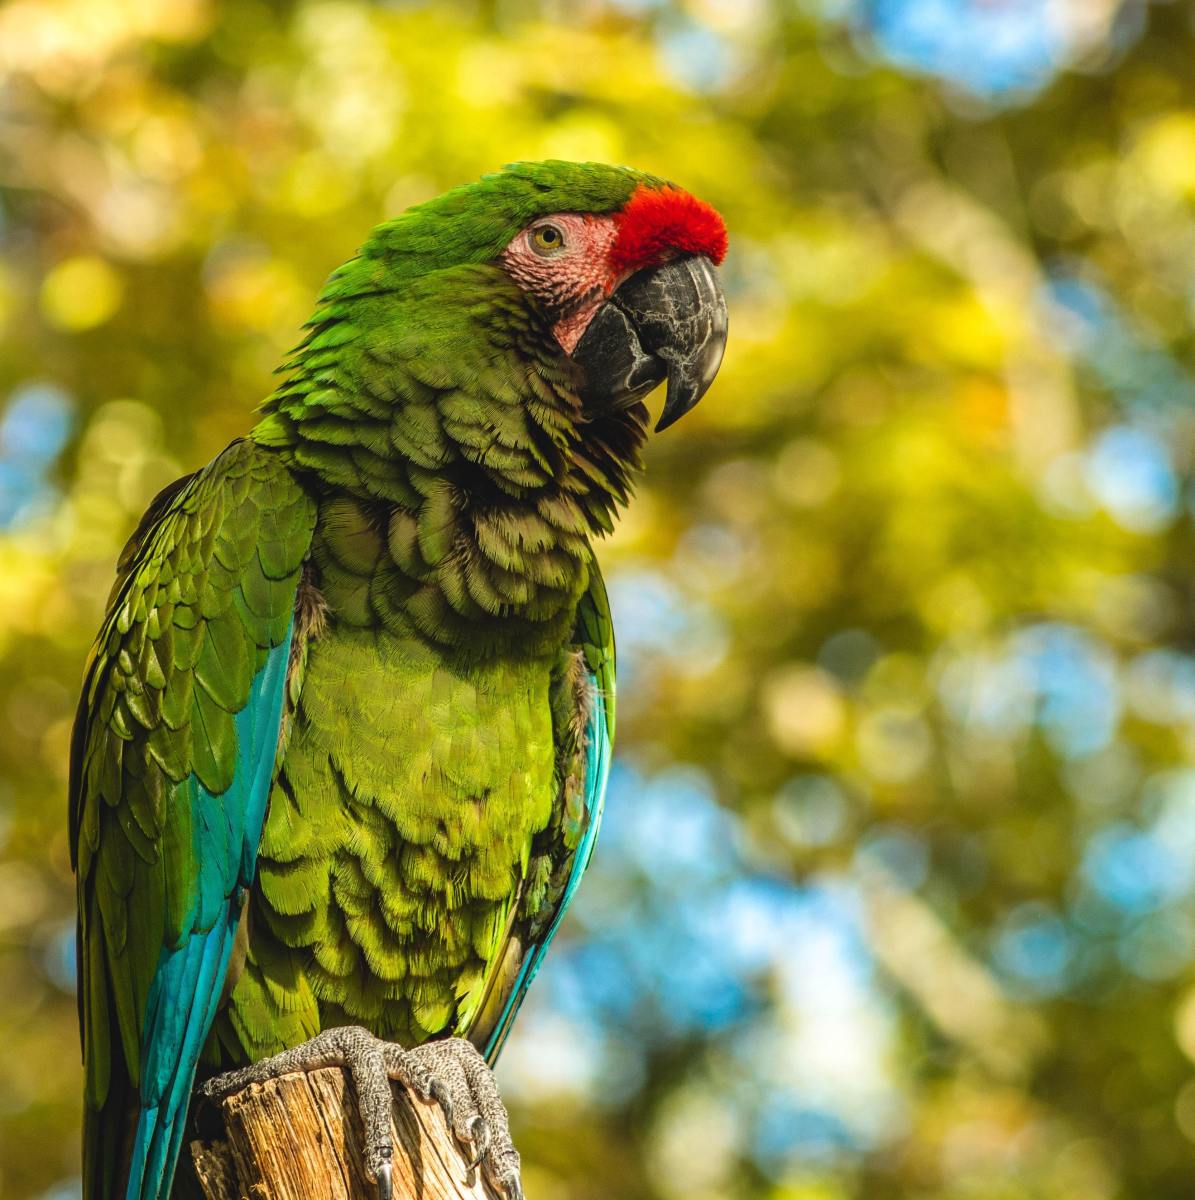 Female parrots don't require a mate to lay eggs (though said eggs will be infertile). How can you discourage egg-laying?